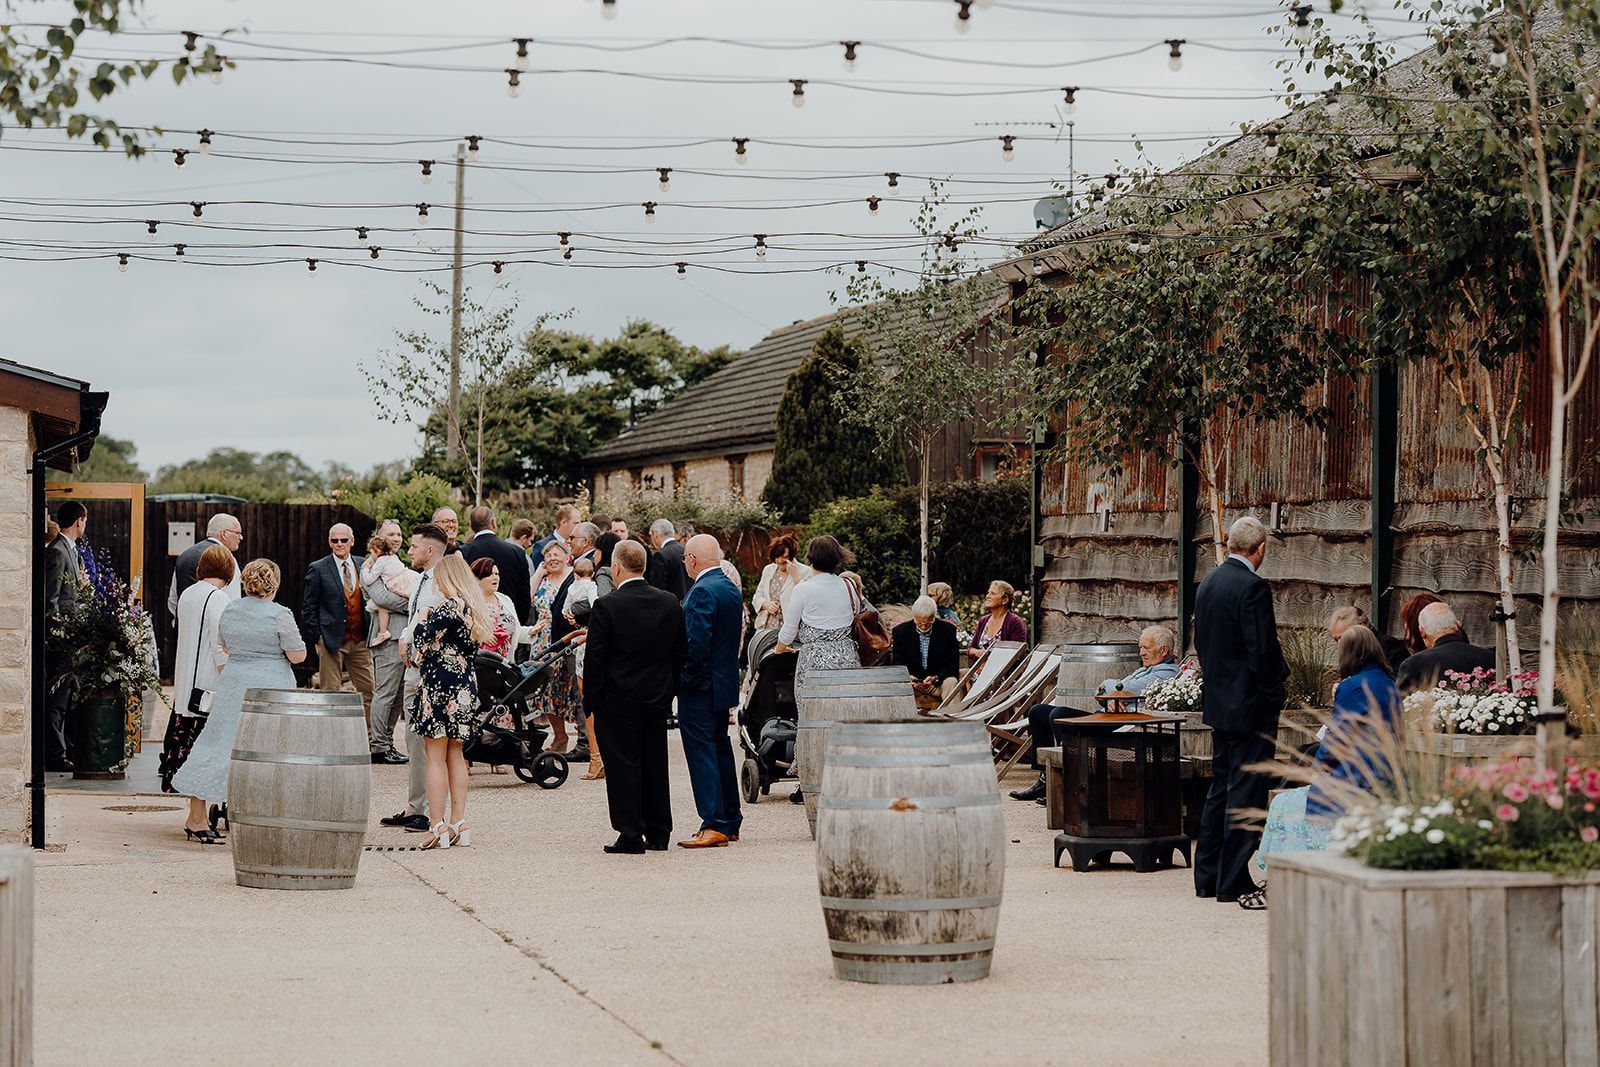 Georgie and James' guests in the courtyard at Huntsmill Farm prior to the wedding ceremony. Photo thanks to Sam and Steve Photography.